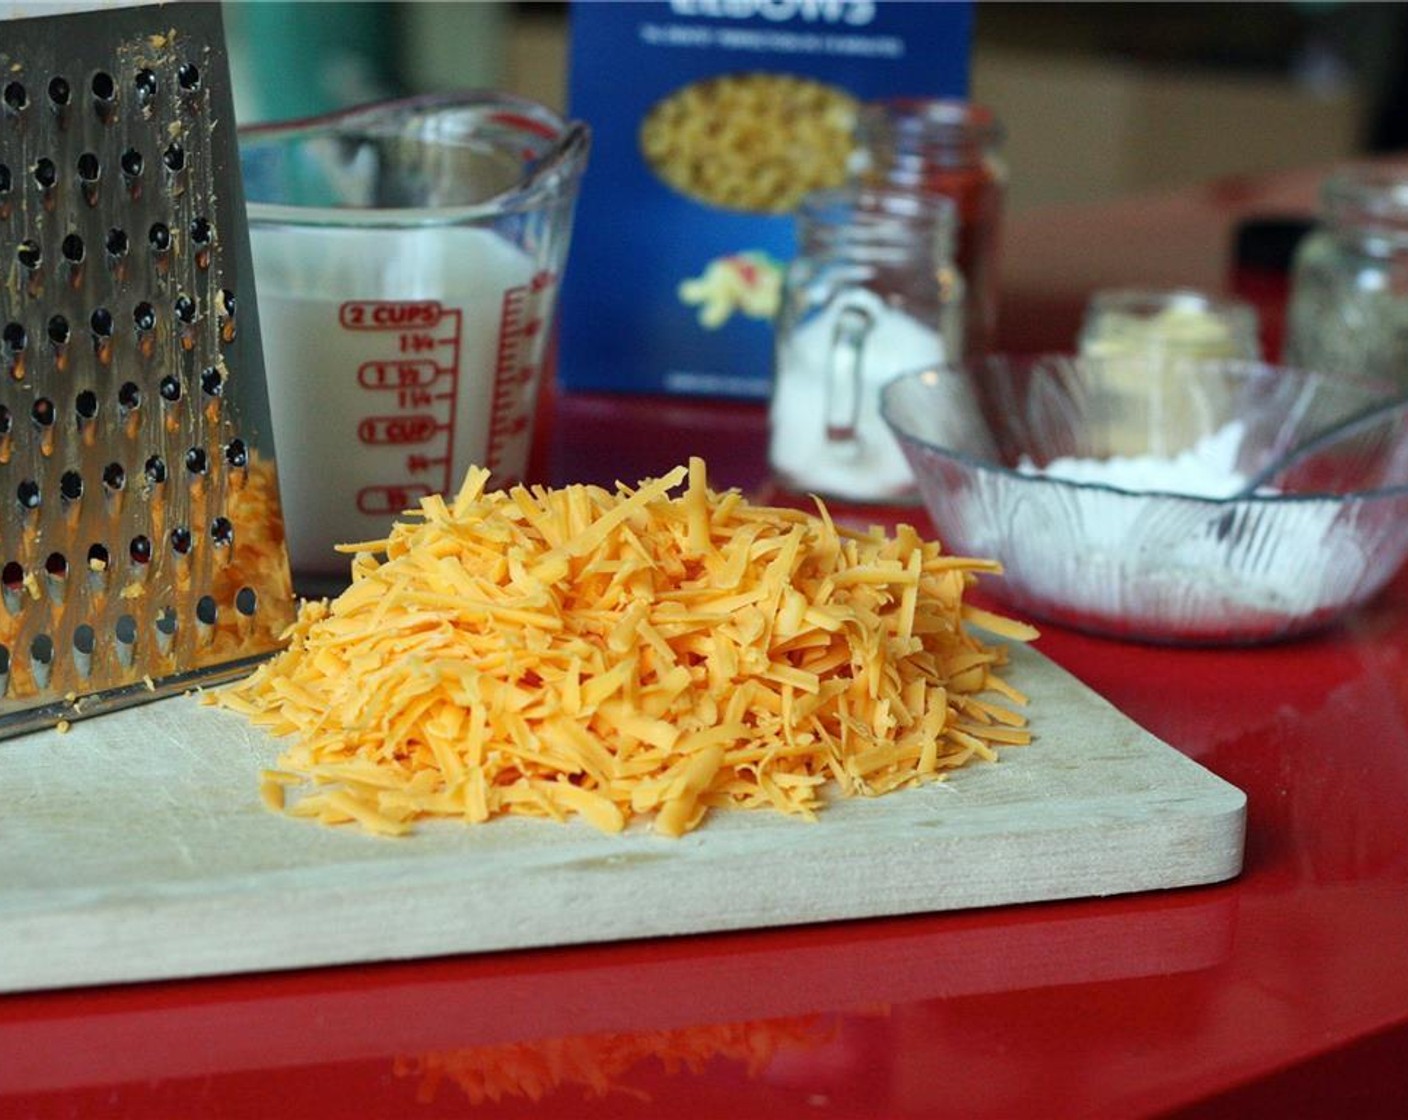 step 2 Measure out Milk (2 cups) and grate the Cheddar Cheese (2 cups). Set aside.